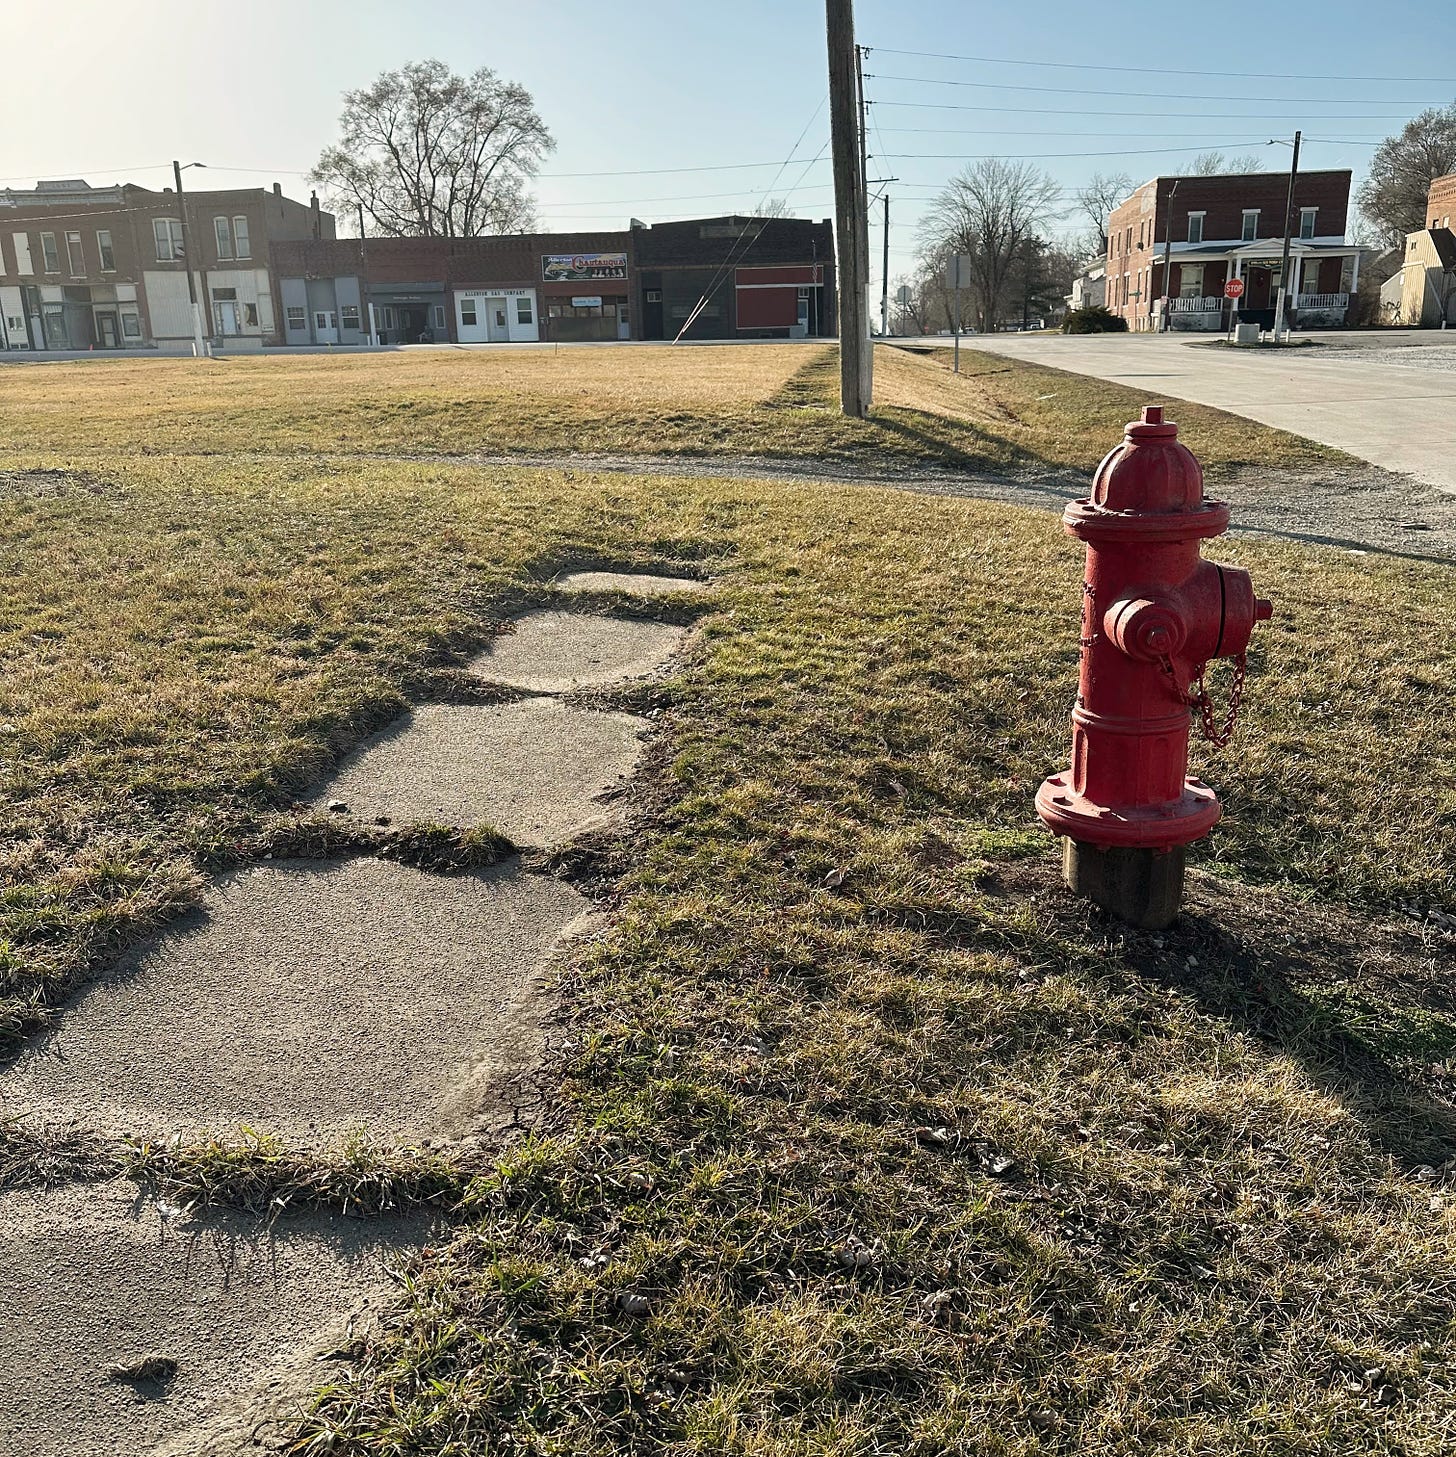 A decayed sidewalk and a fire hydrant